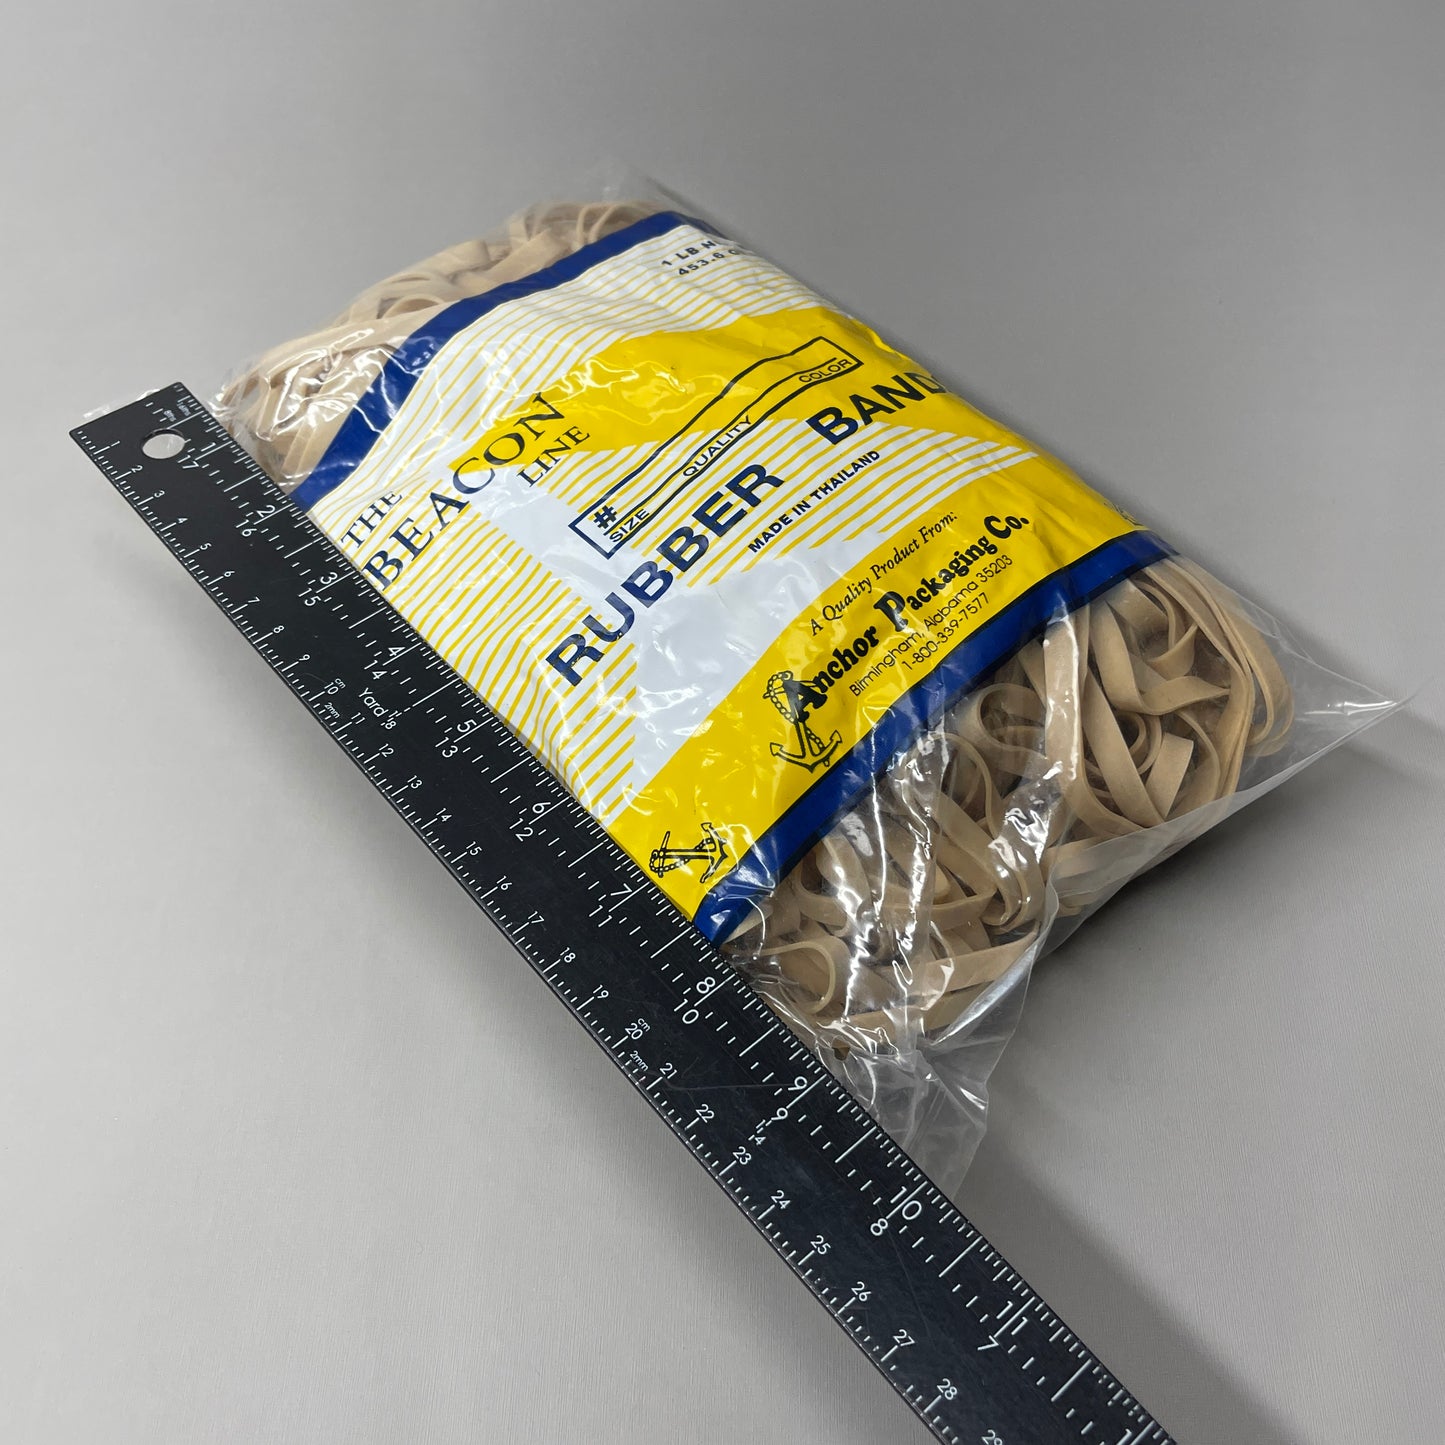 ANCHOR PACKAGING CO The Beacon Line Rubber Bands 3 lbs Total (3 x 1 lb Bags) Size 64 (New)